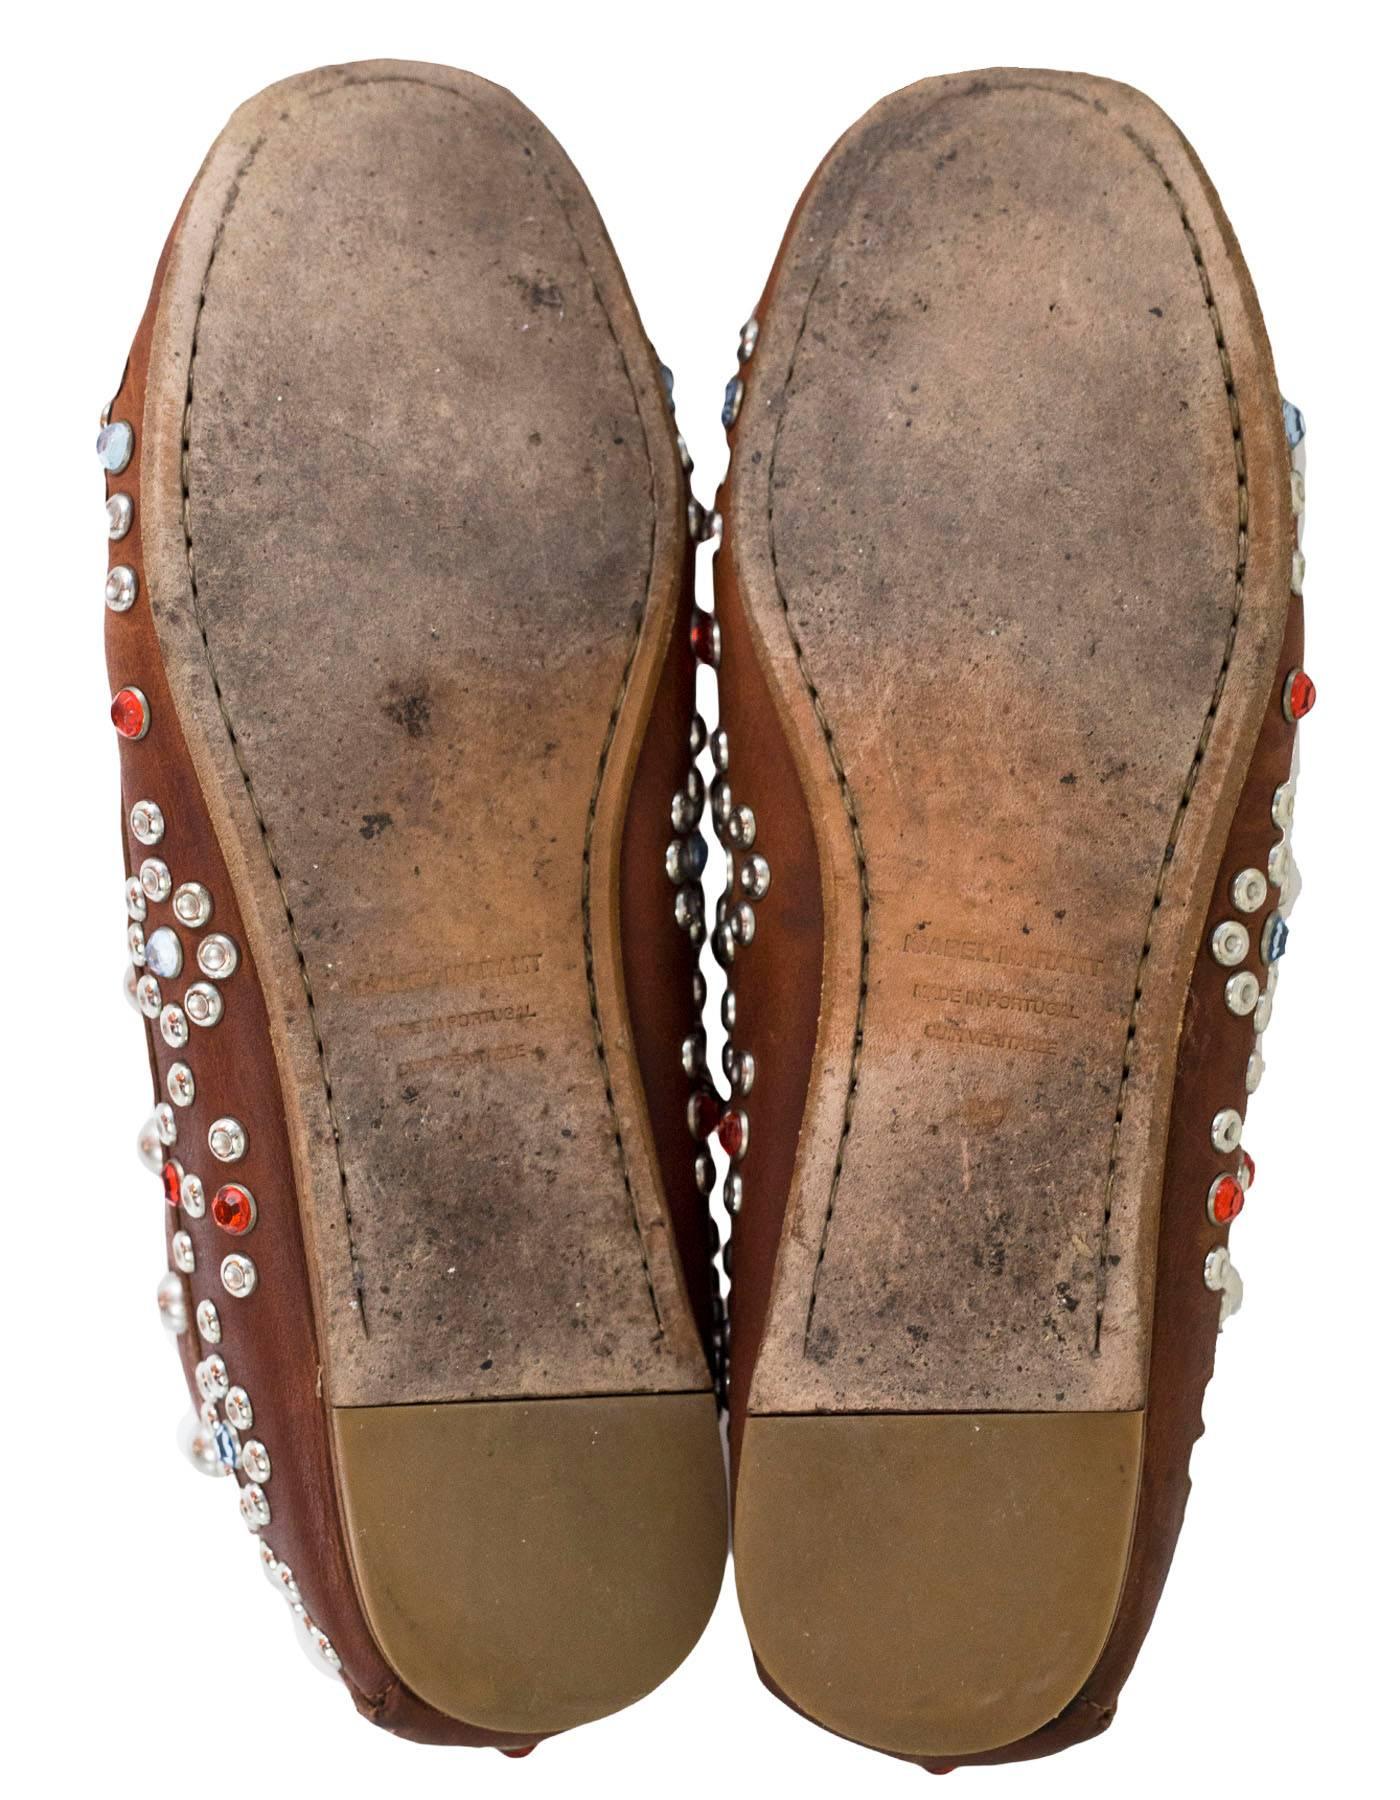 Women's Isabel Marant Brown Studded Loafers Sz 40